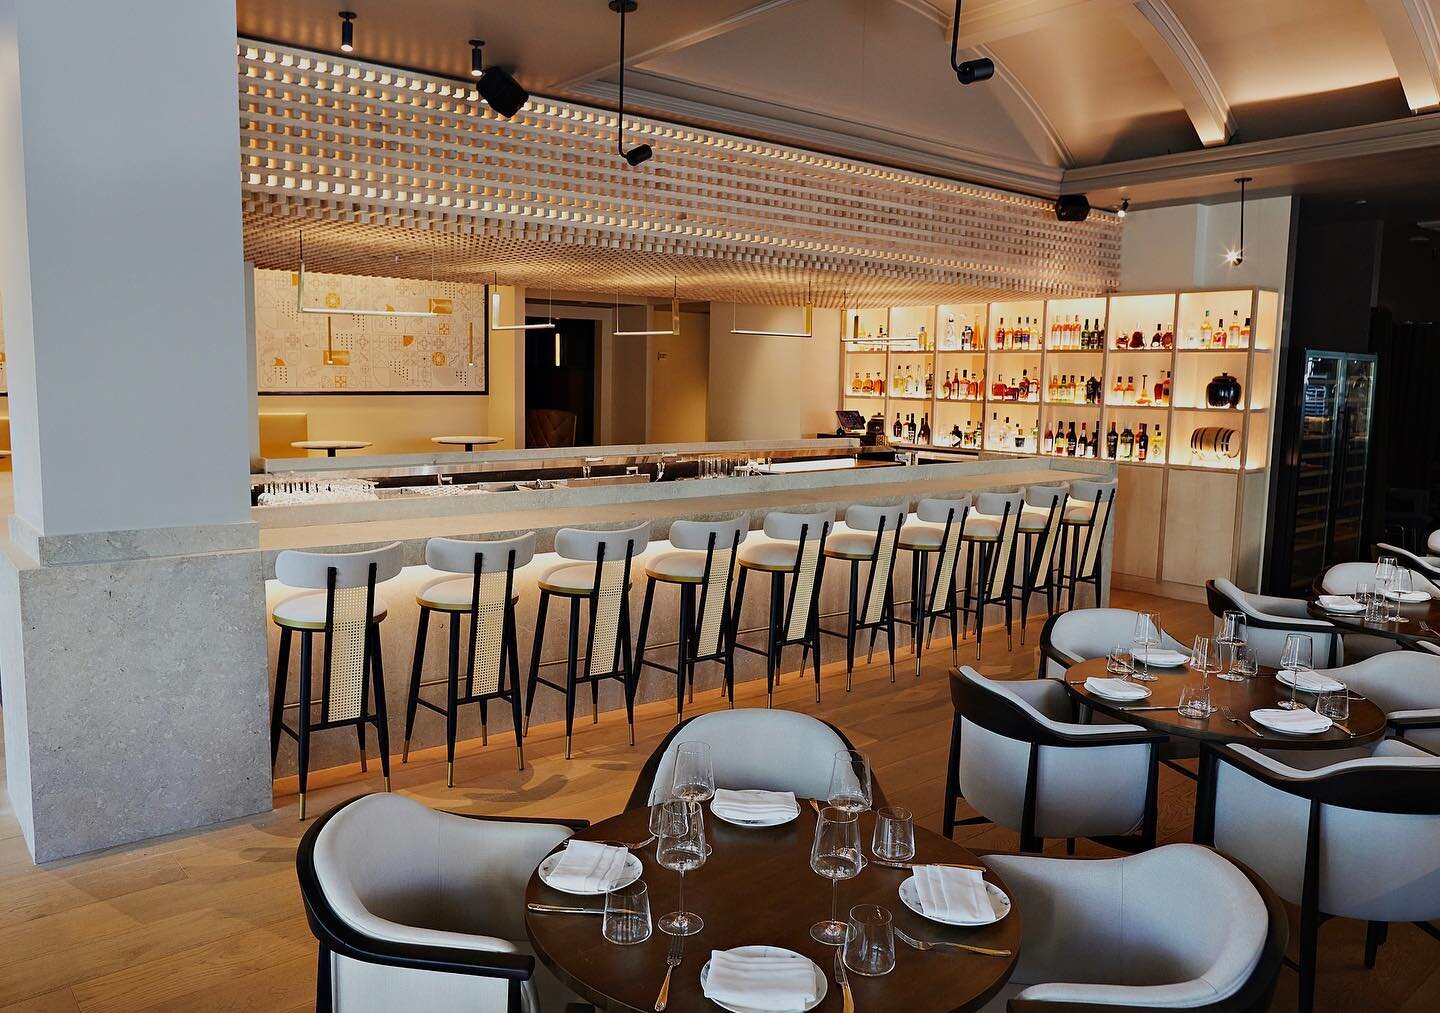 The Seven Restaurant Group &lsquo;saga&rsquo; continues with their fifth opening! Welcome to West End, @thesagadc ! 

Spain meets Latin America at this modern restaurant where Chef Enrique Limardo shows off his six years of fine-dining training in th